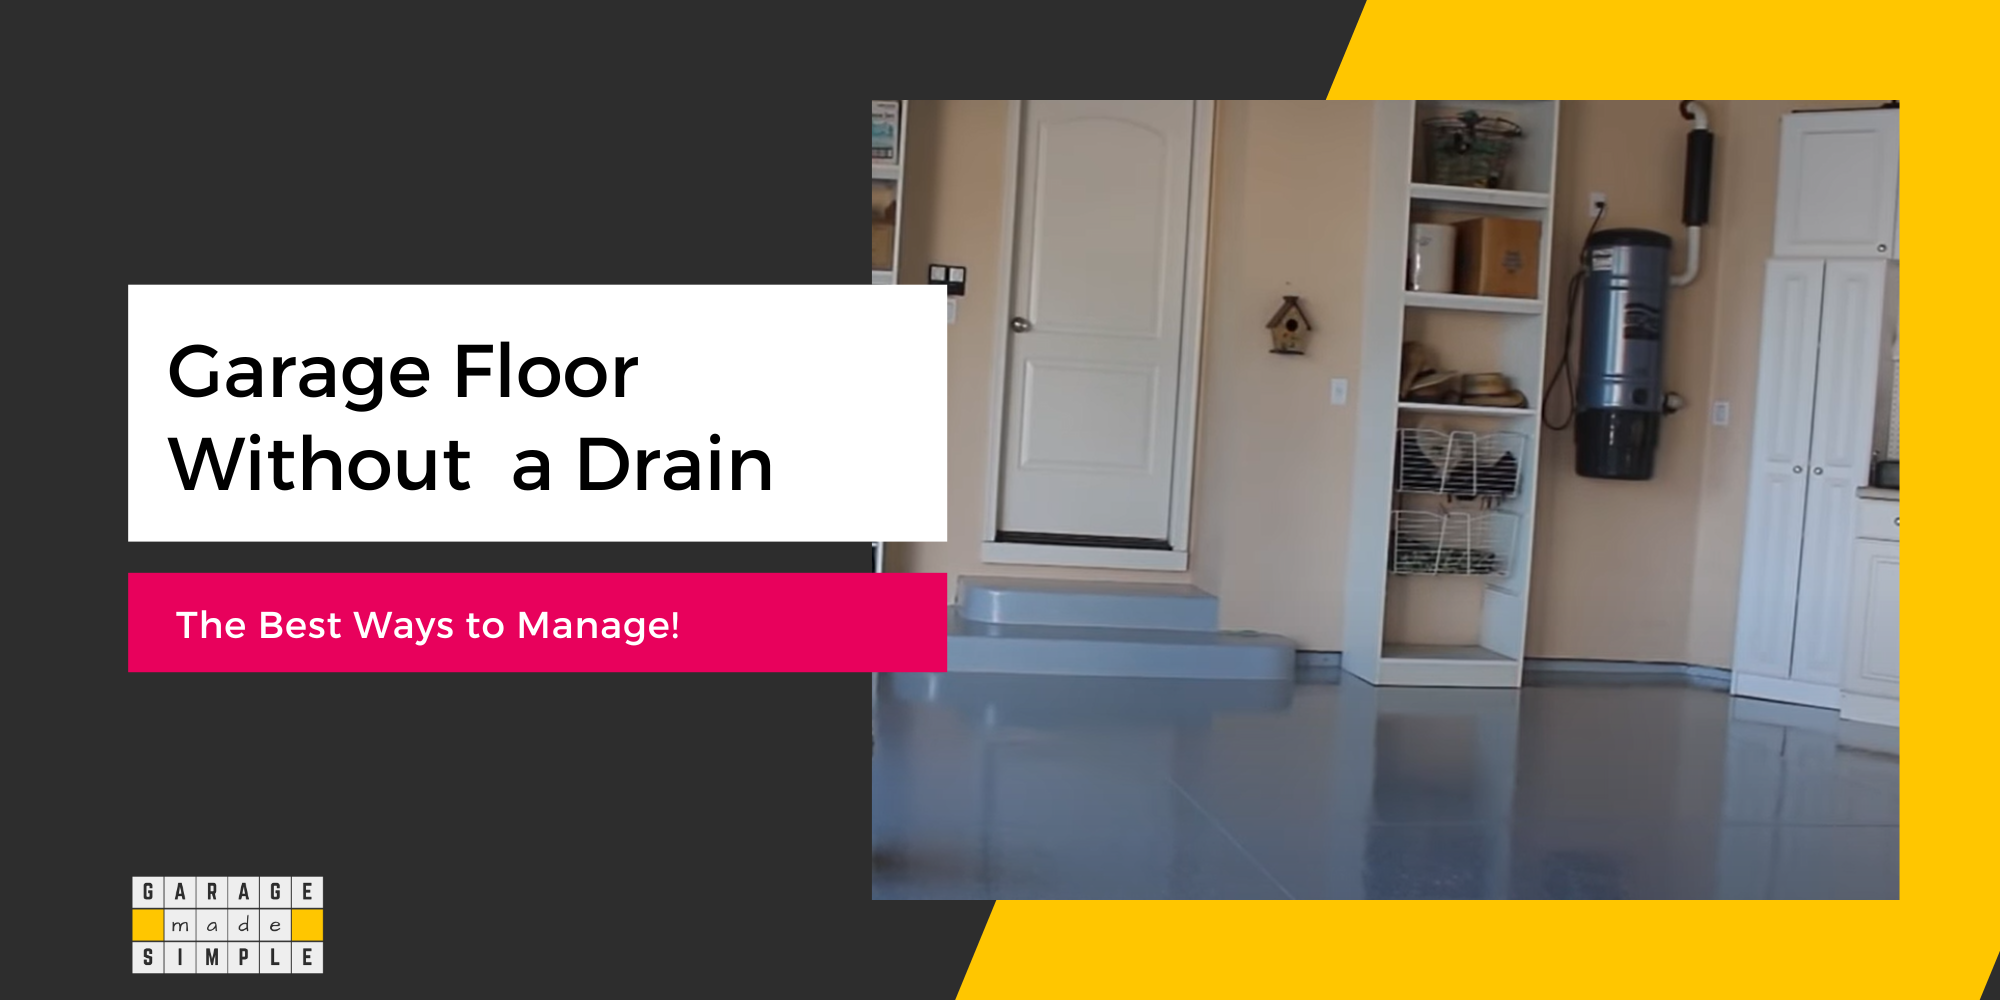 Garage Floor Without a Drain? (The Best Ways to Manage!)